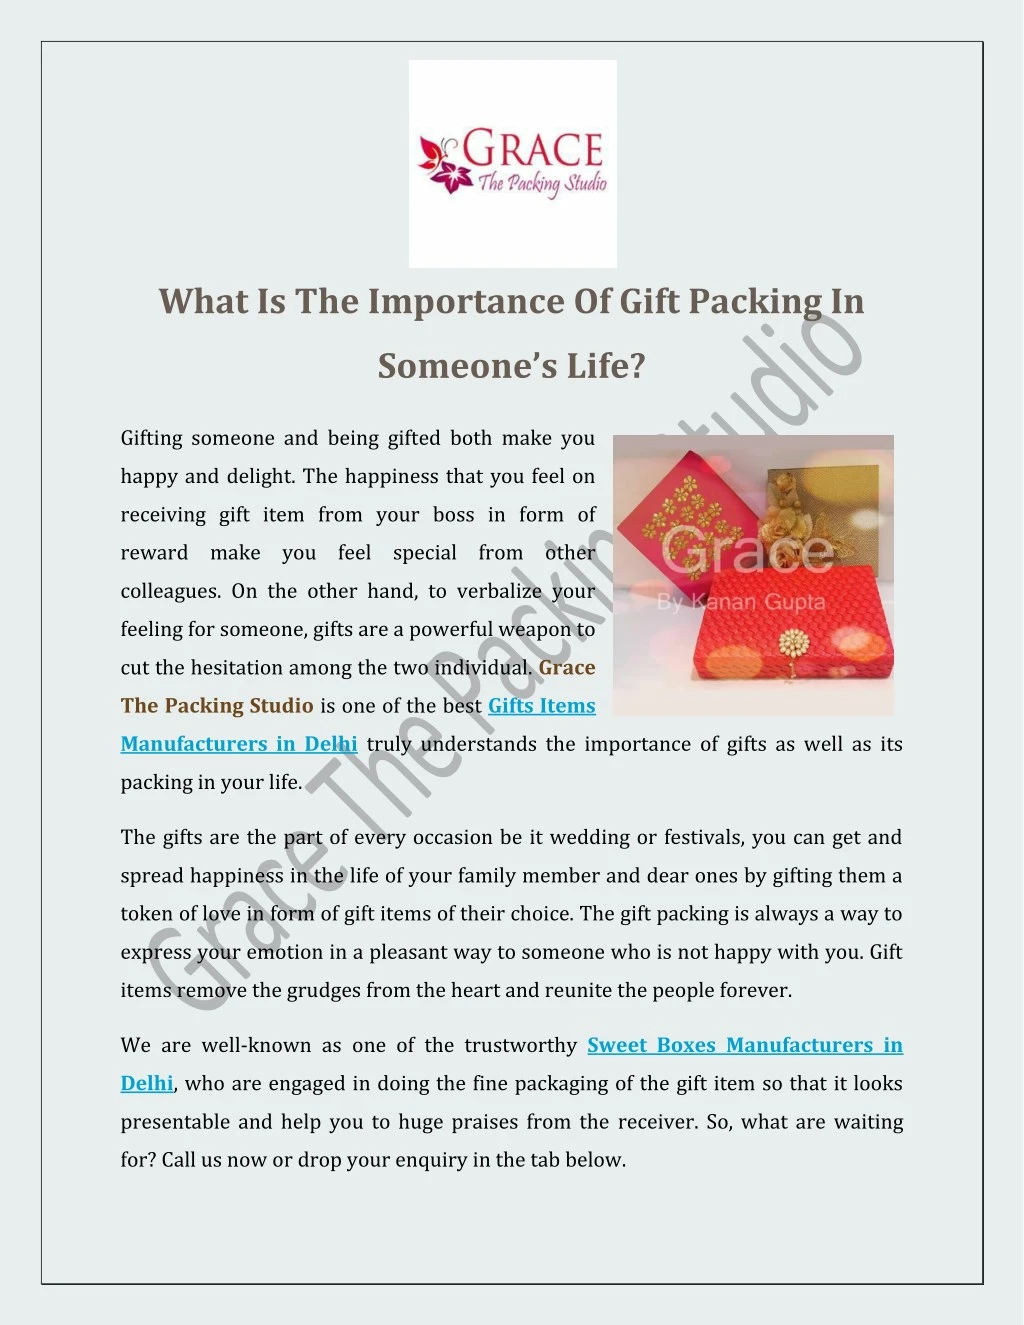 what is the importance of gift packing in